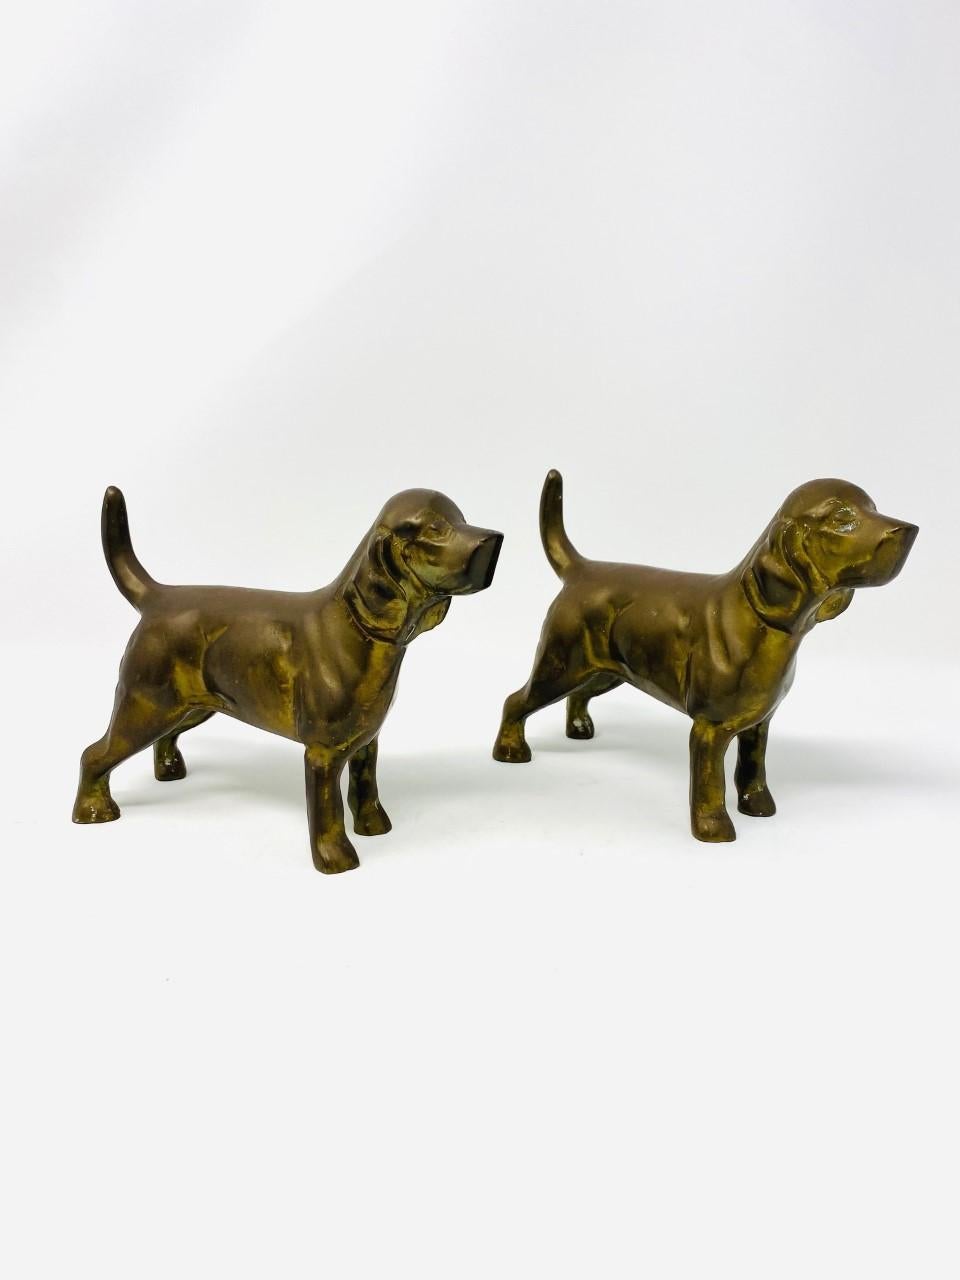 Beautiful pair of bronze Labrador sculpture bookends. These pieces date to the 1950s and will enhance your décor from a luxe lodge to eclectic midcentury. The figures are dense and full of detail. Classic pieces that add style.